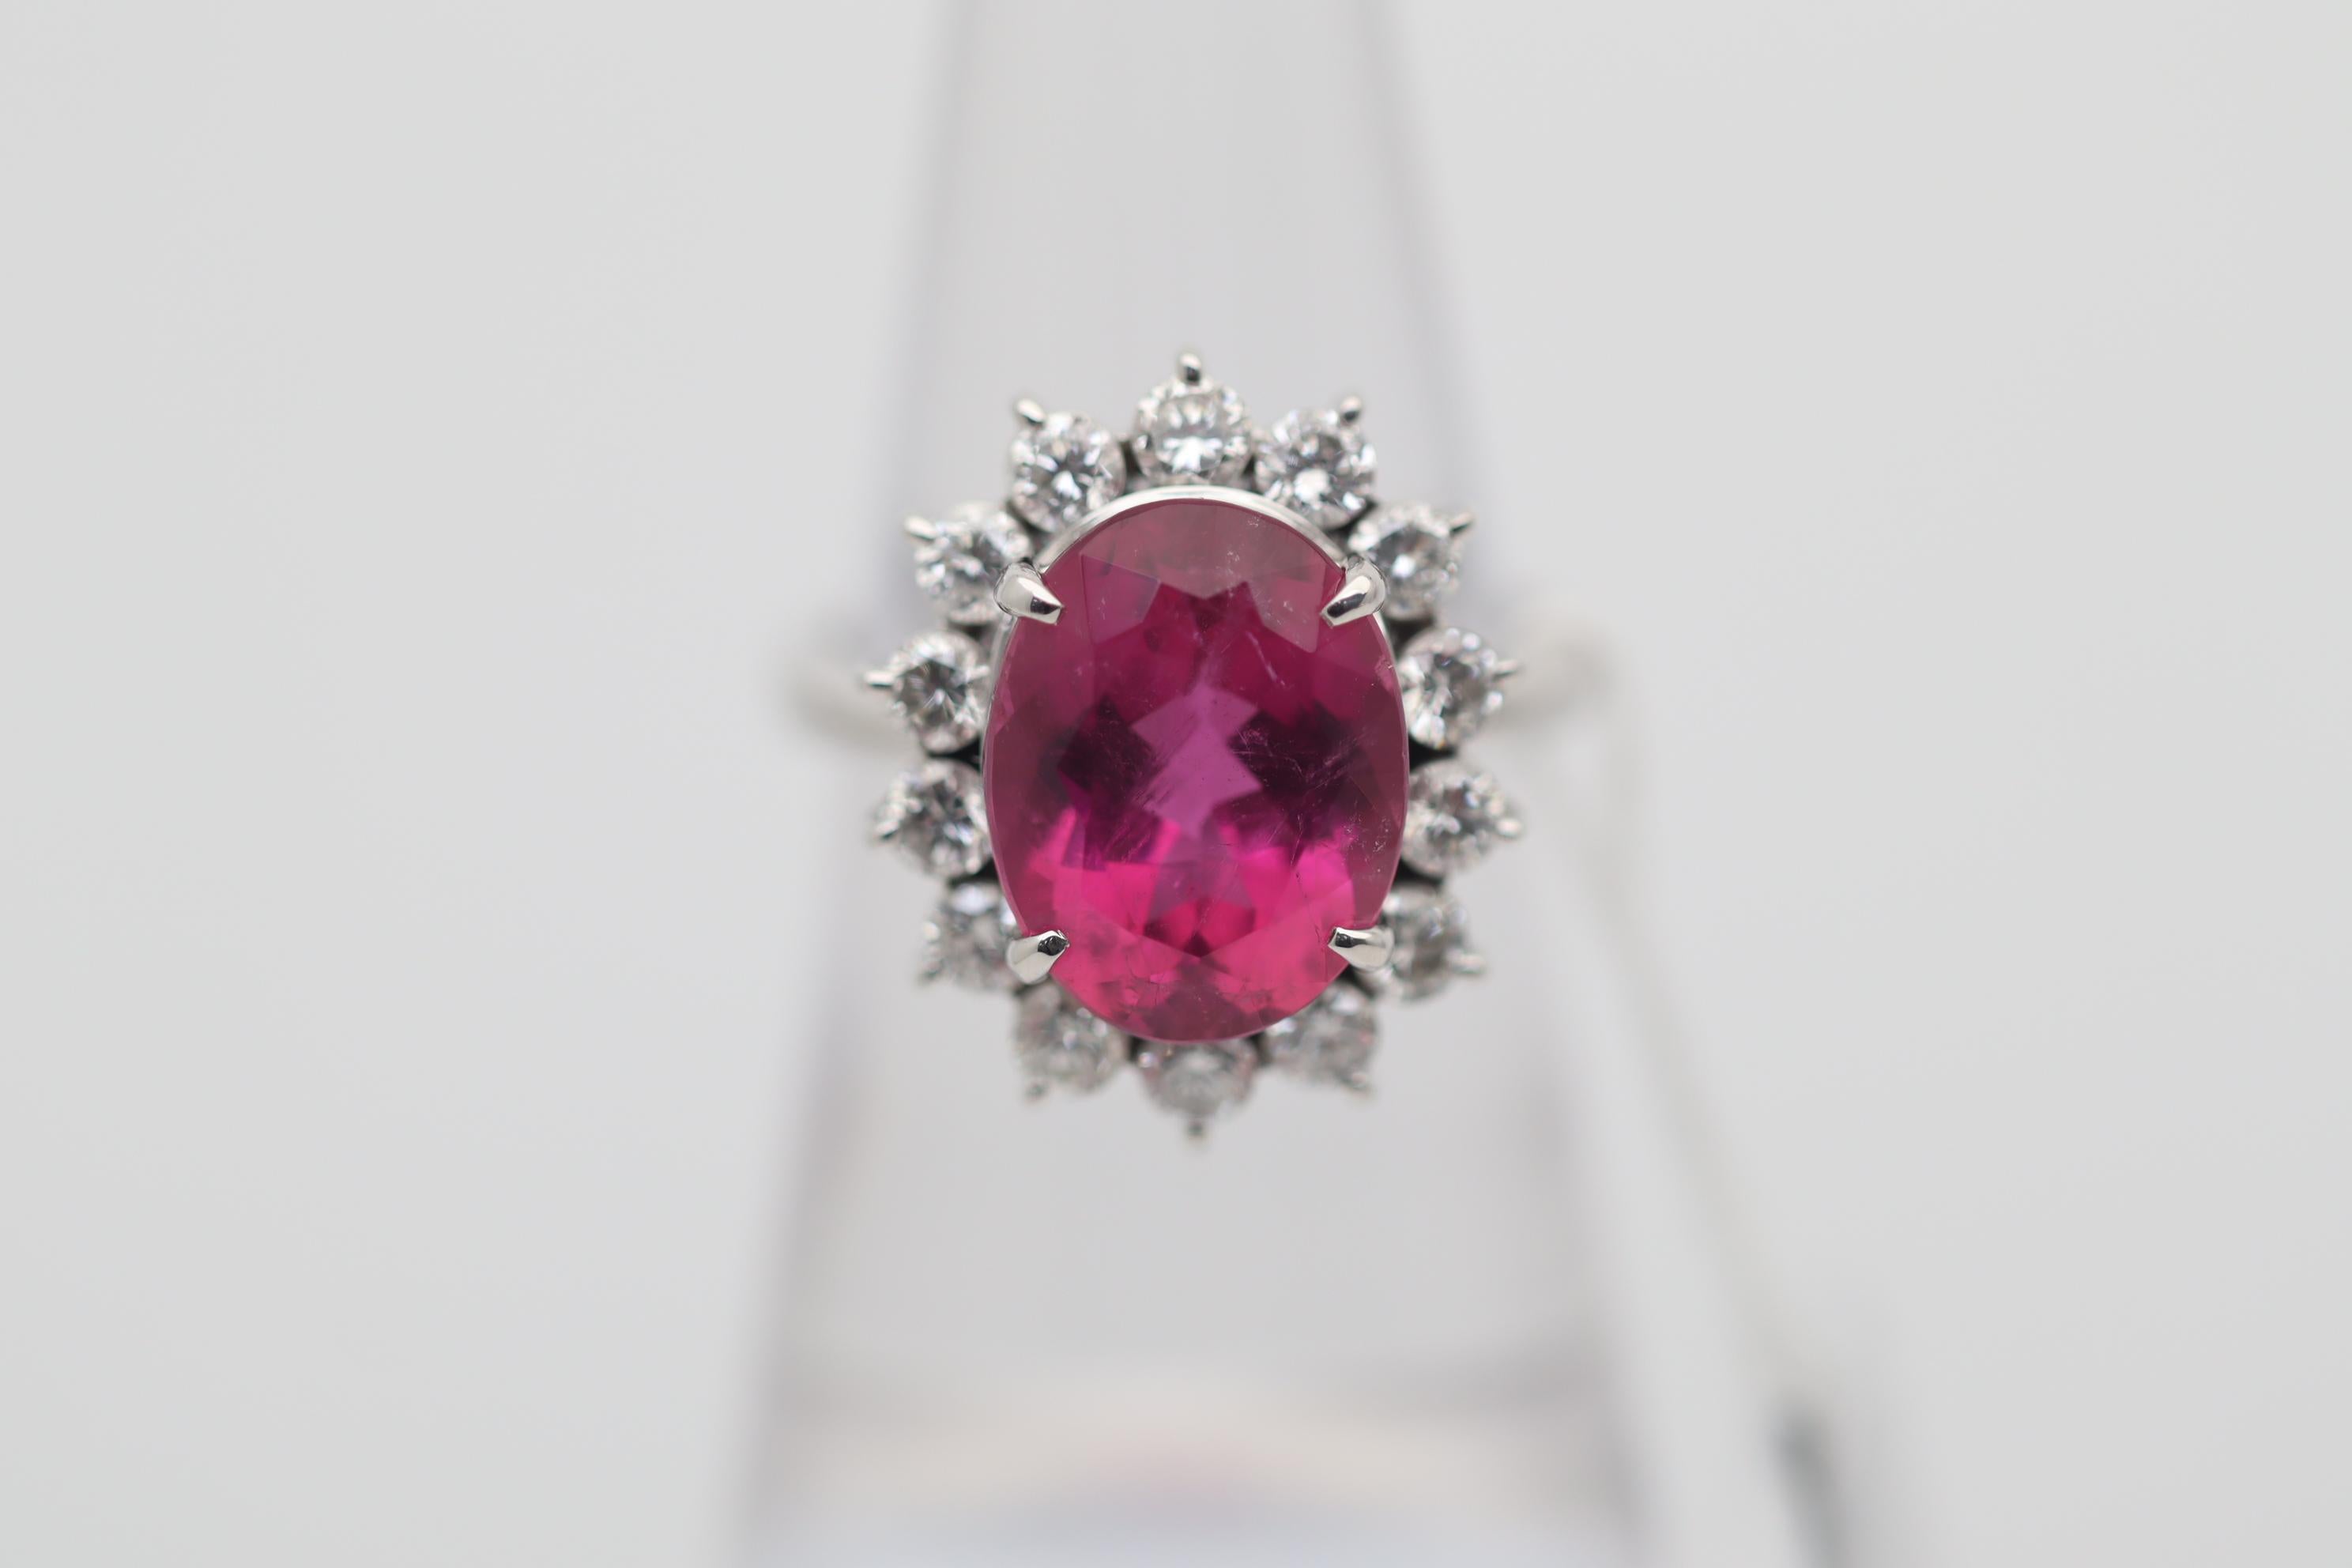 A sweet and stylish platinum ring featuring a bright rich pink tourmaline weighing 5.00 carats. It has a lovely oval-shape and a reddish-pink color that some consider to be rubellite. It is complemented by a halo of round brilliant-cut diamonds